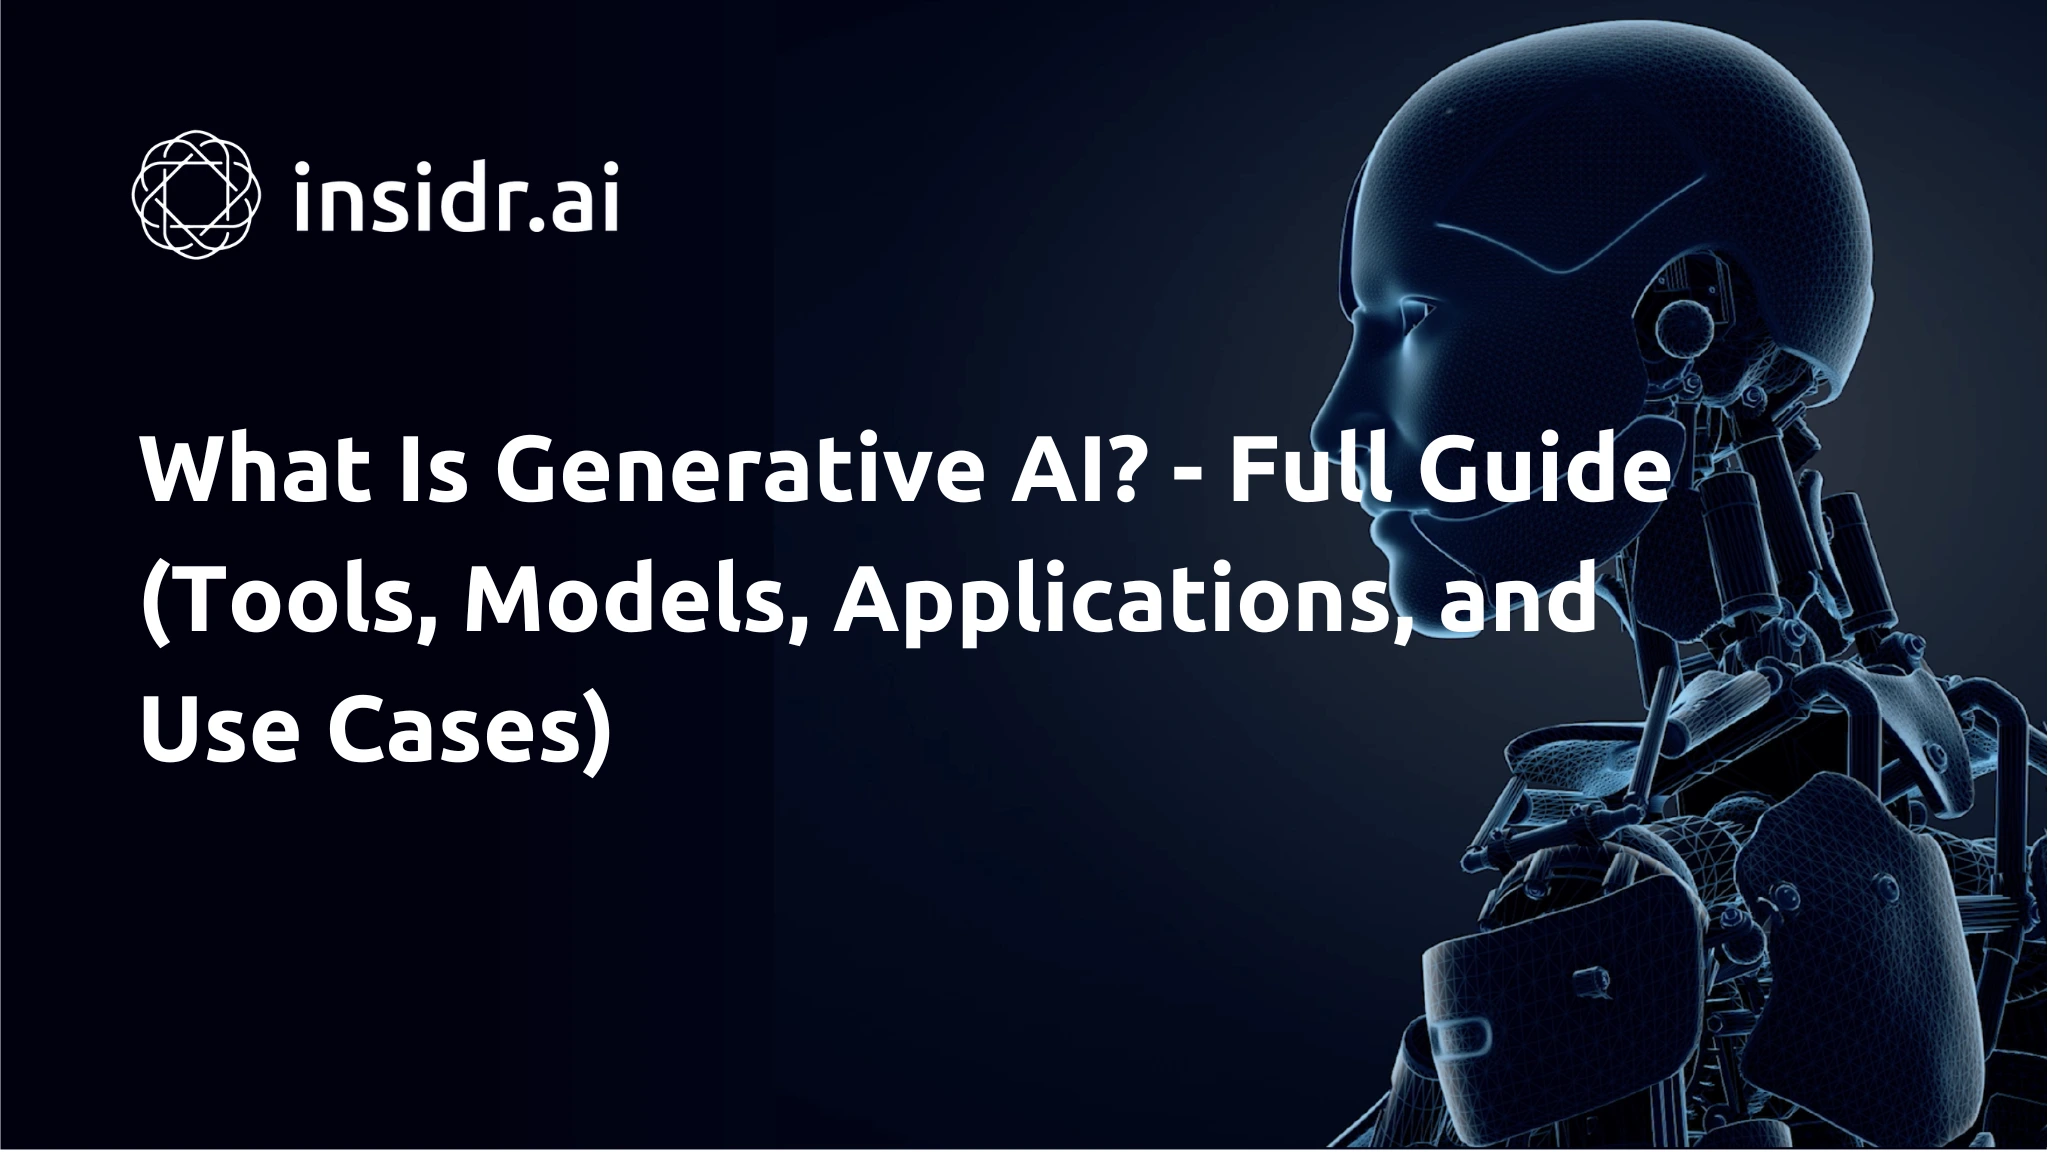 Generative AI: What Is It, Tools, Models, Applications and Use Cases